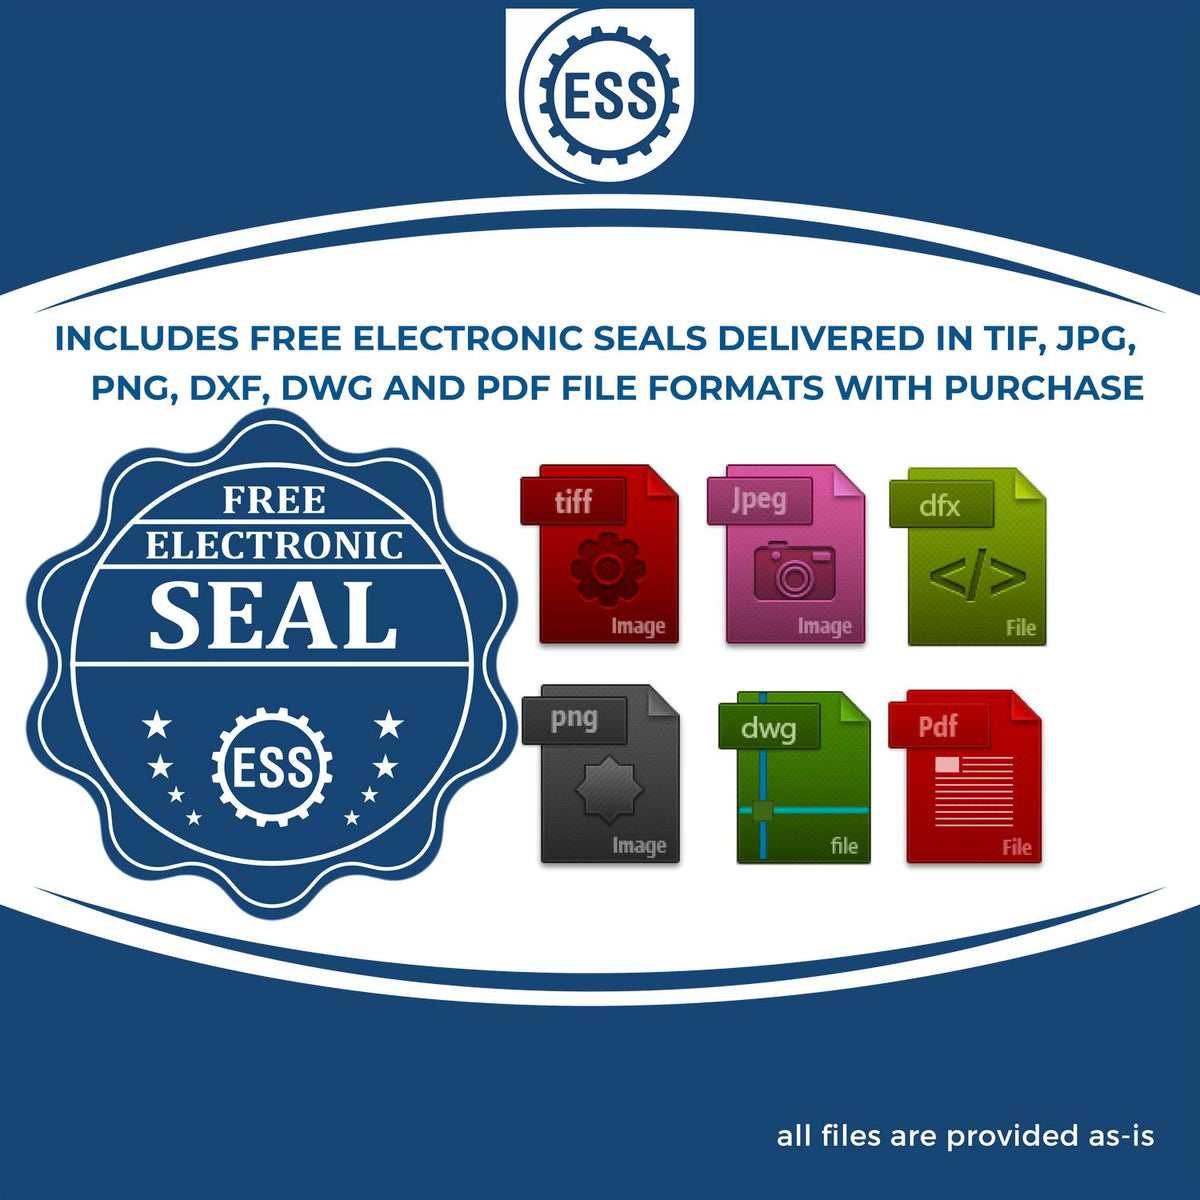 An infographic for the free electronic seal for the Slim Pre-Inked Iowa Architect Seal Stamp illustrating the different file type icons such as DXF, DWG, TIF, JPG and PNG.